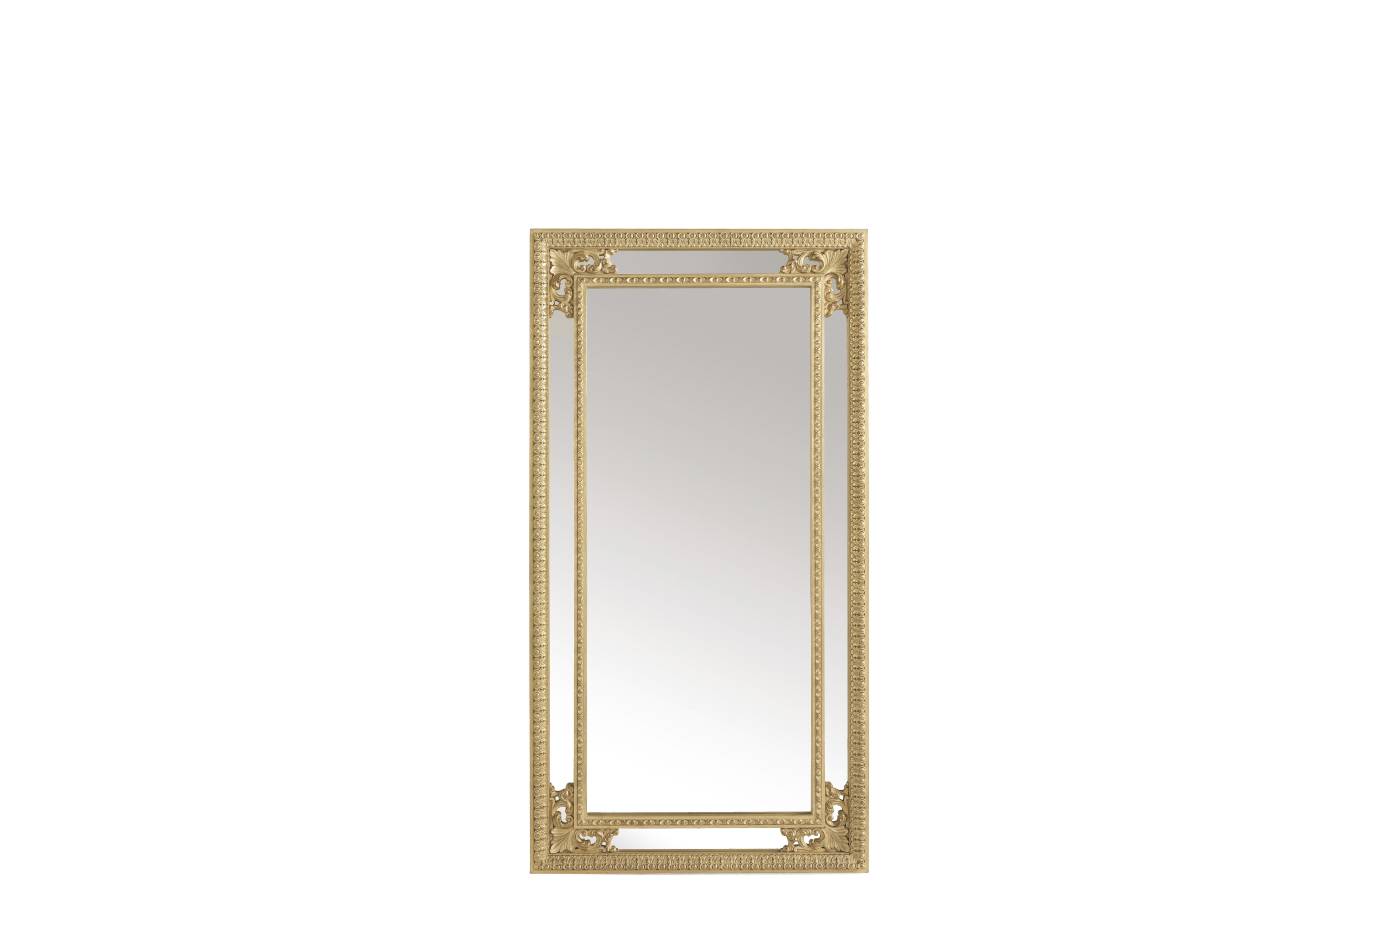 RENAISSANCE mirror – Transform your space with luxury Made in Italy classic MIRRORS of Héritage collection.